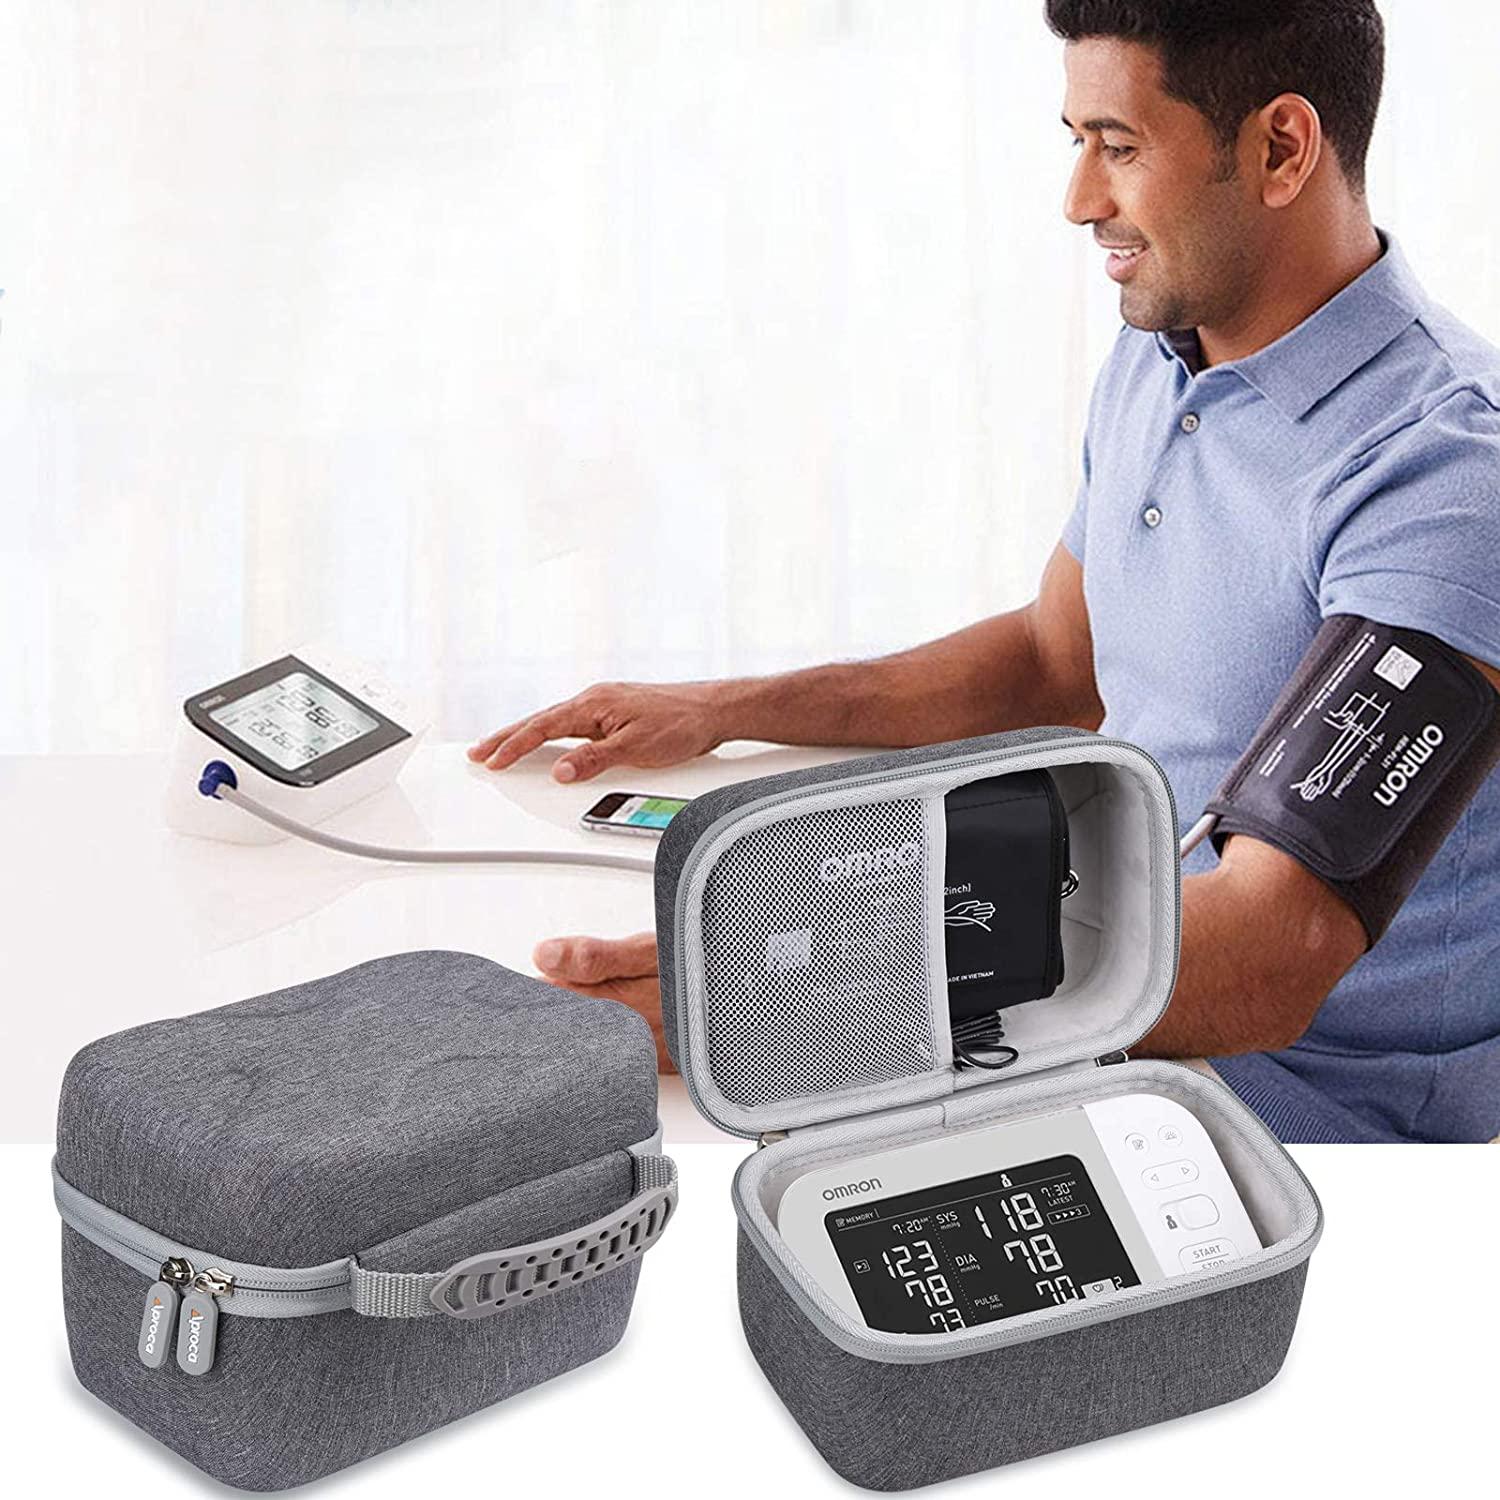 Blood Pressure Monitor for Omron 10 Series Travel Storage Case Carrying Case